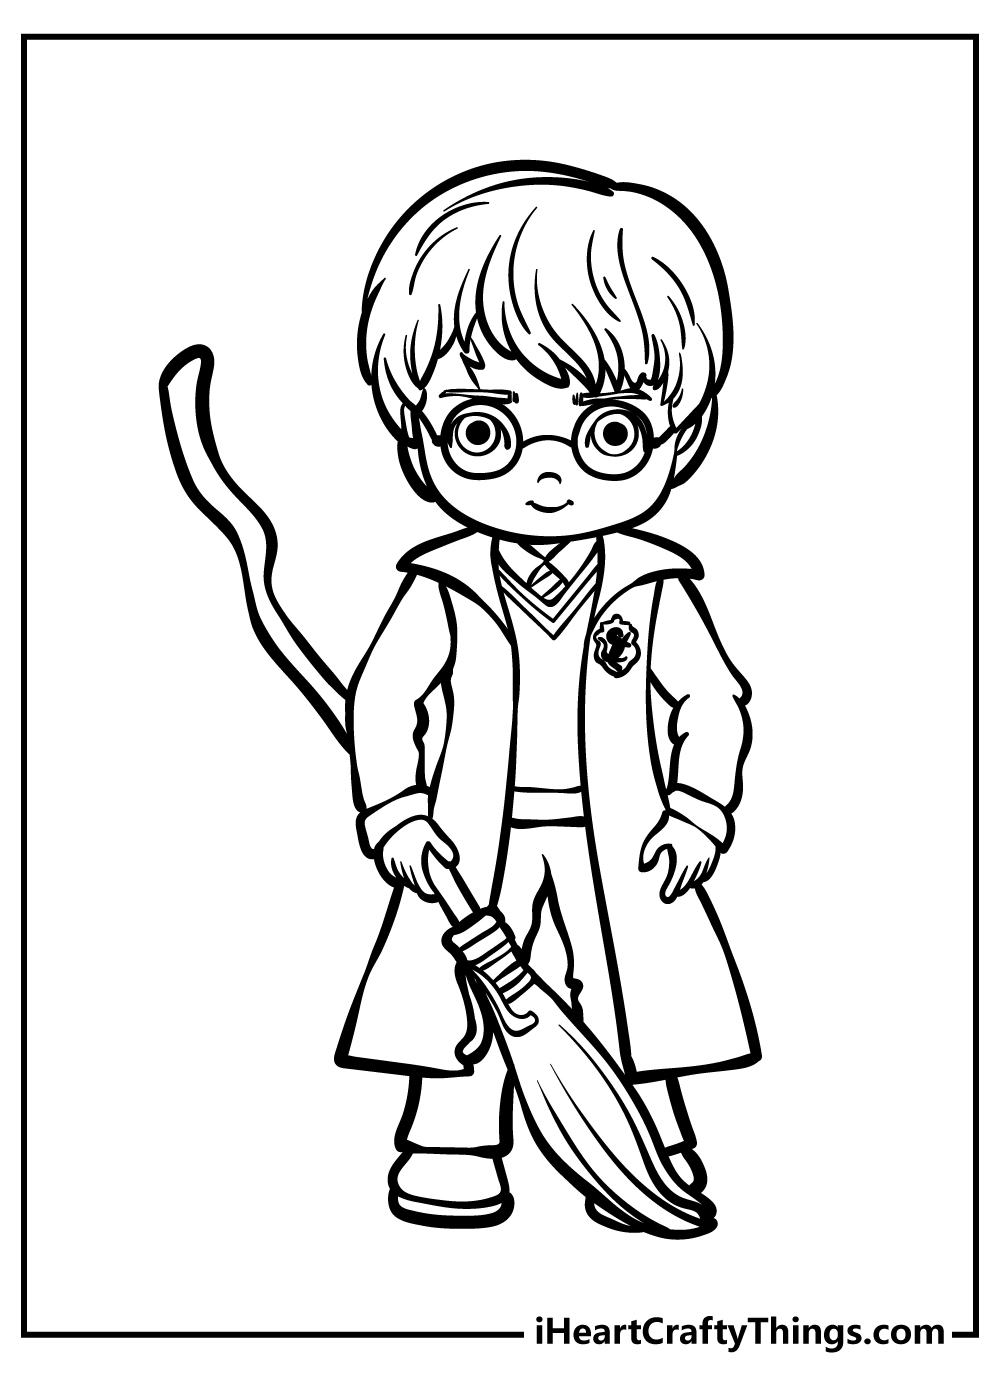 Harry Potter Coloring Book for adults free download